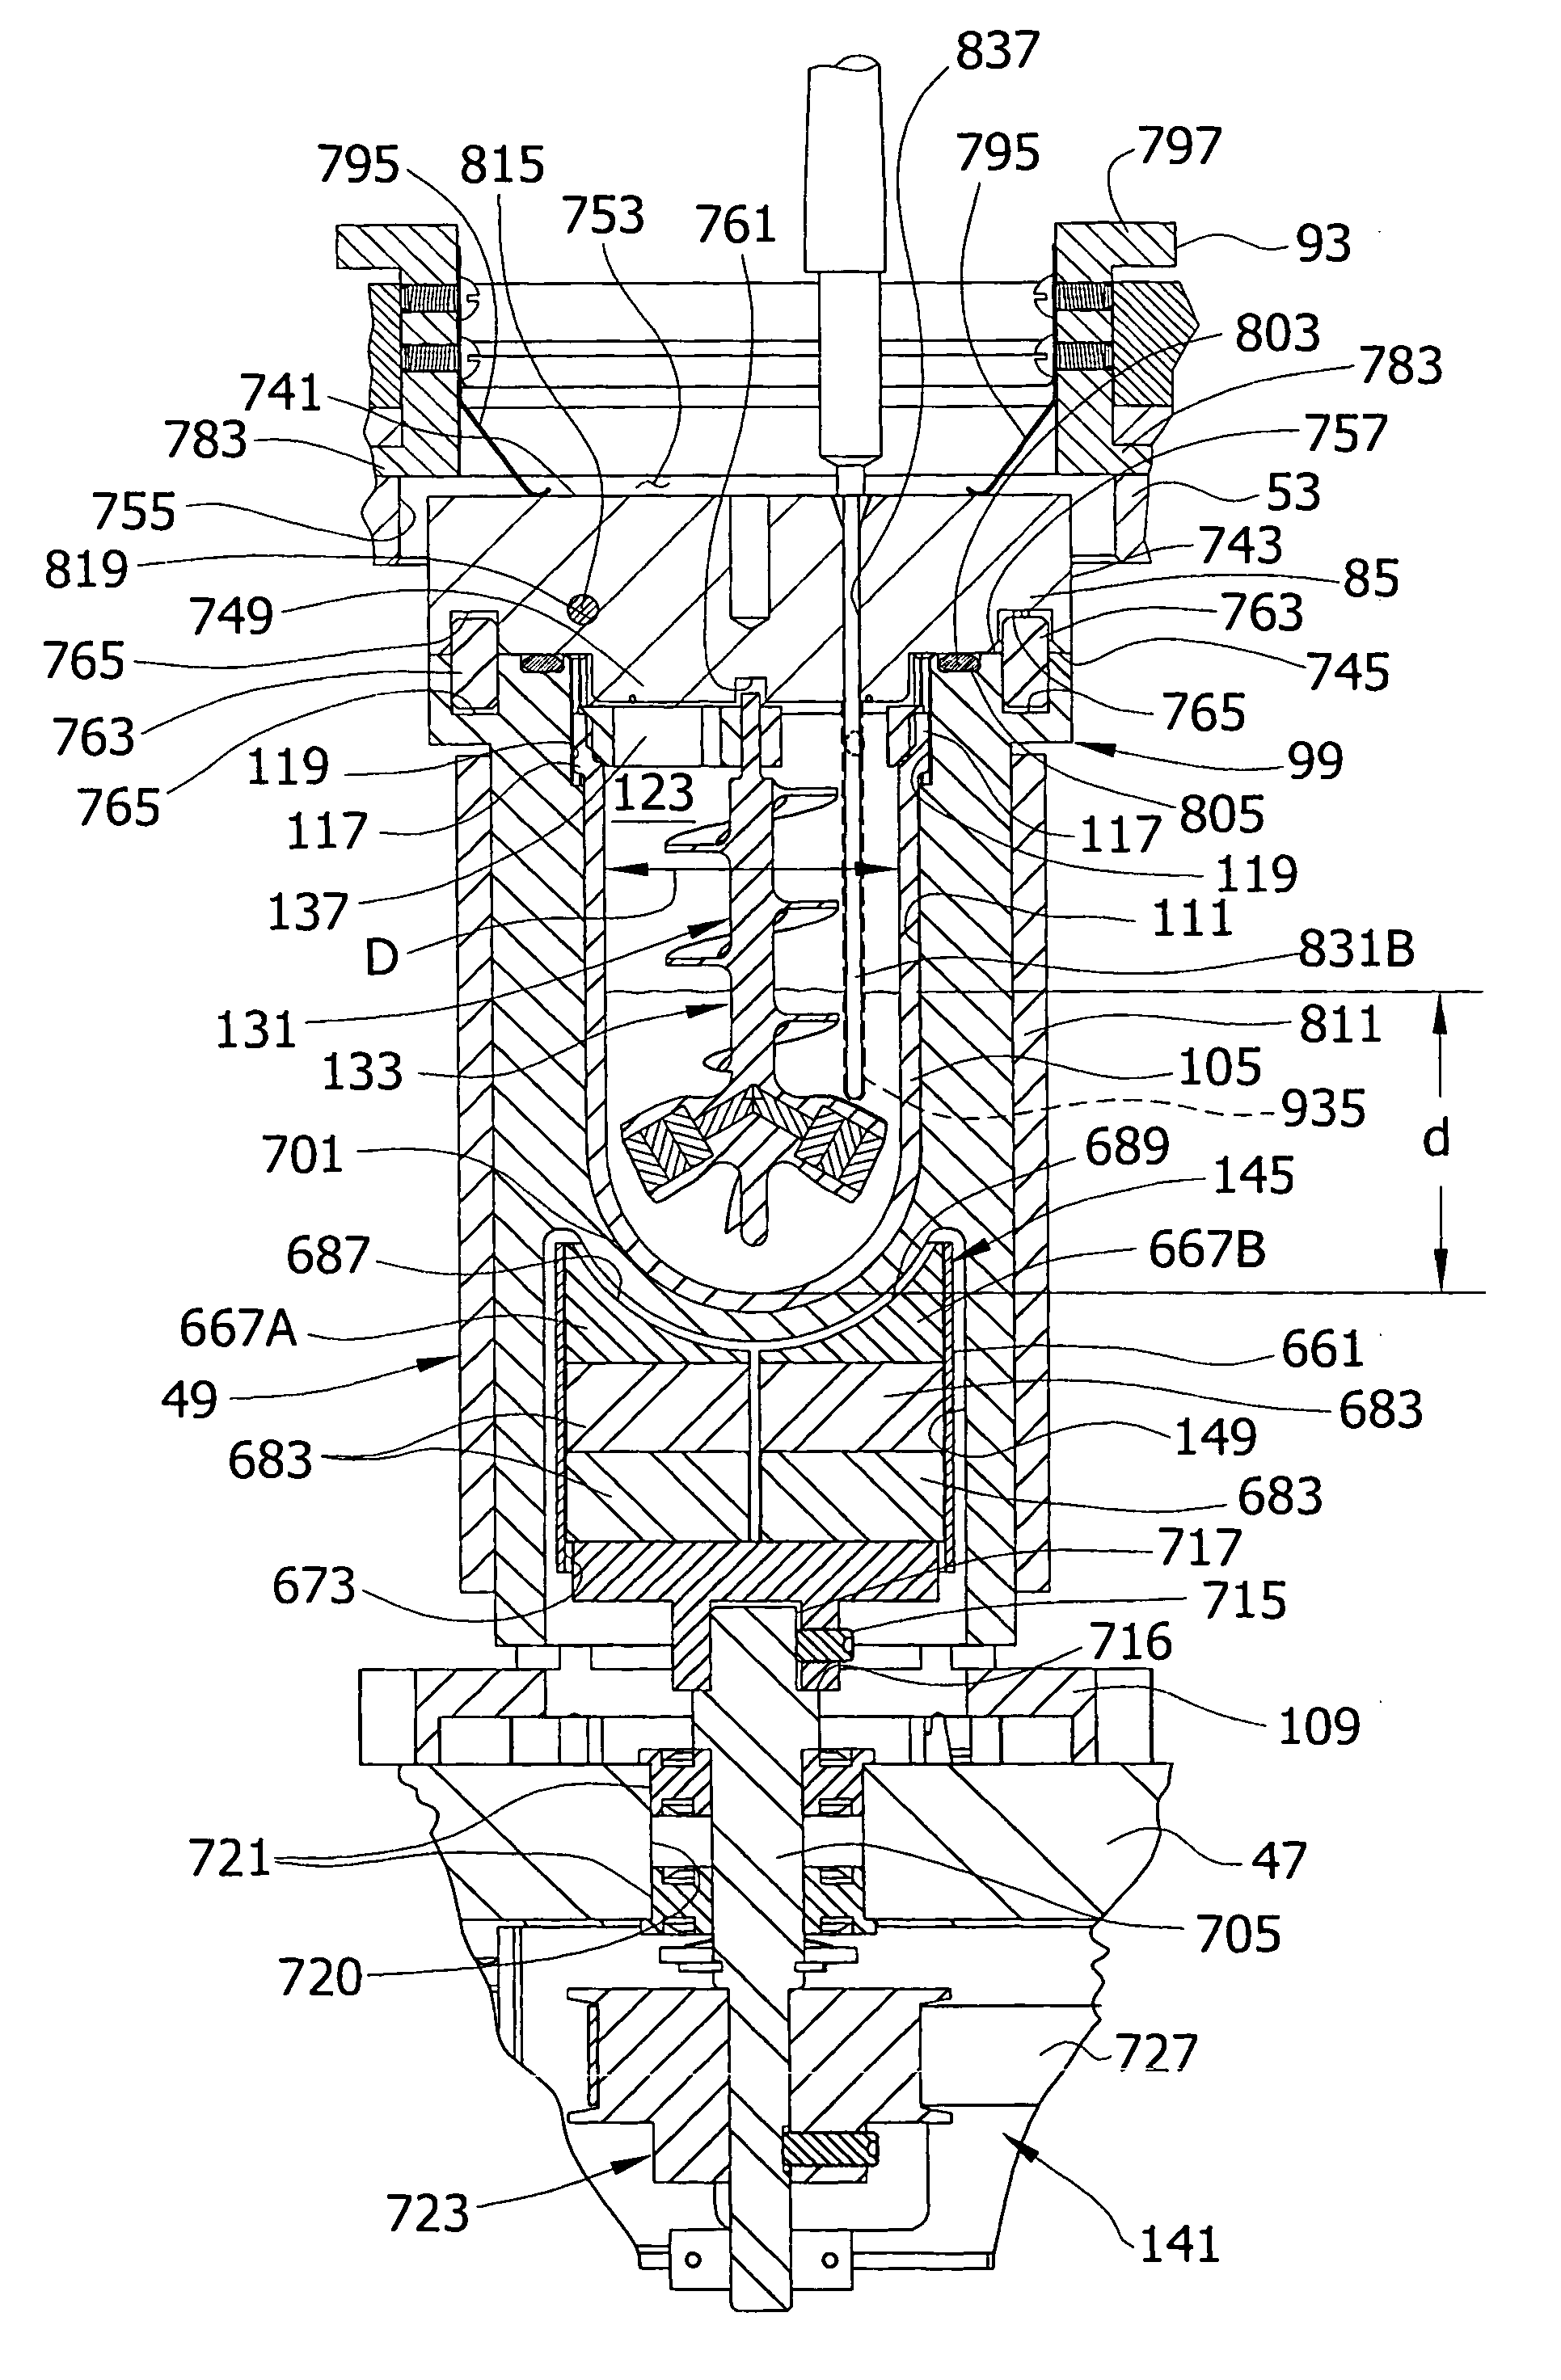 Pressurized reactor apparatus with magnetic stirring